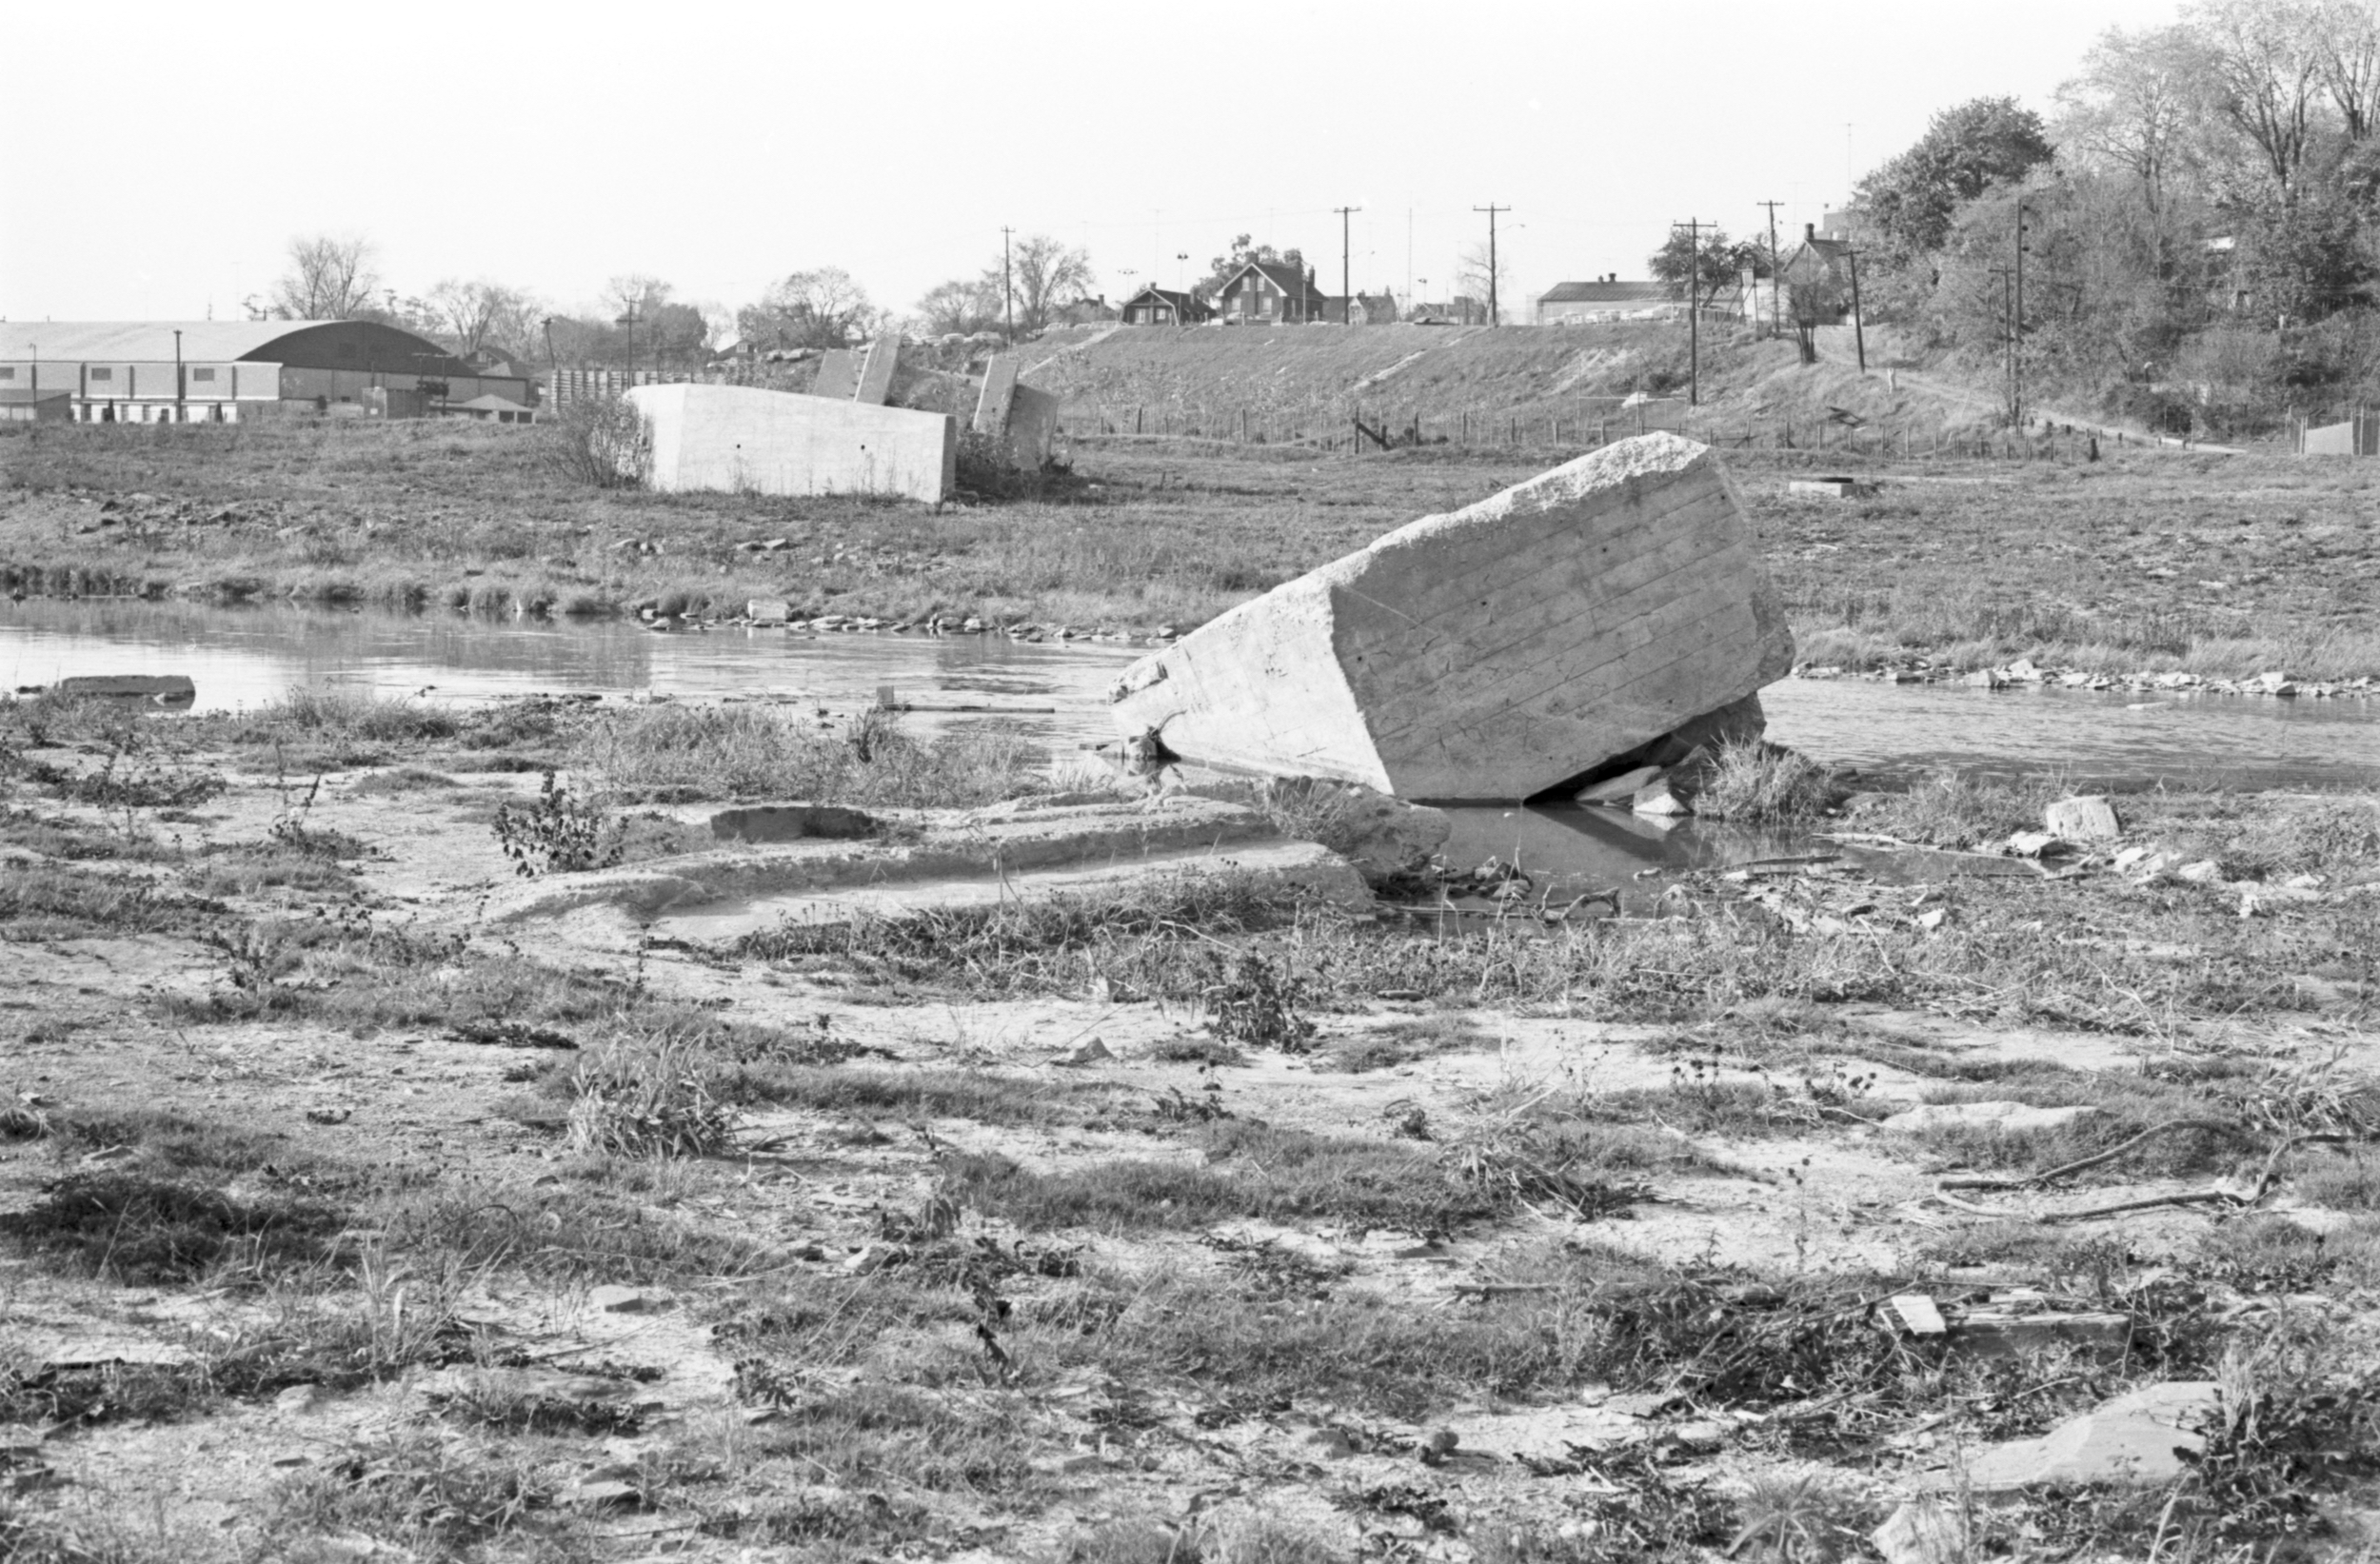 A photo of Raymore Drive in Etobicoke nine years after it was destroyed by Hurricane Hazel.